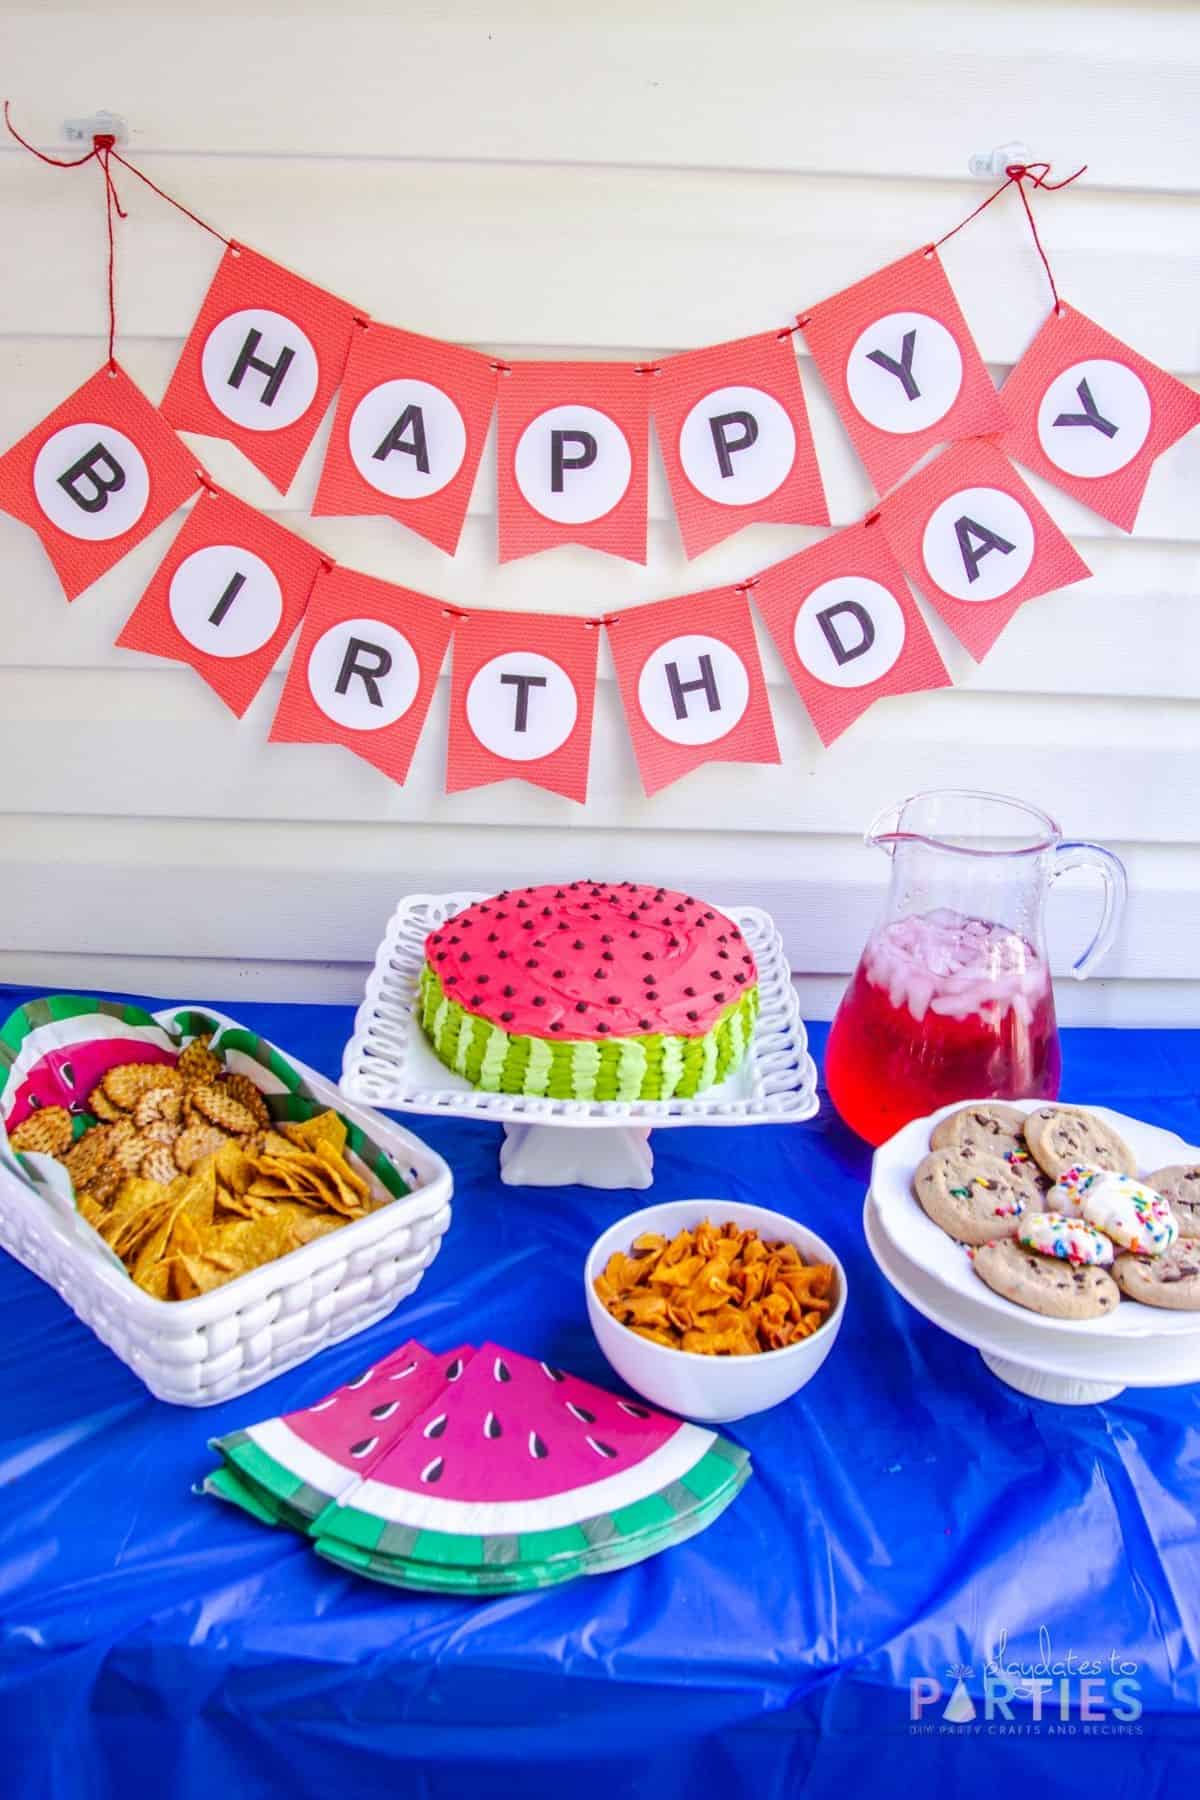 angled down photo of a party table and banner with birthday cake and snacks